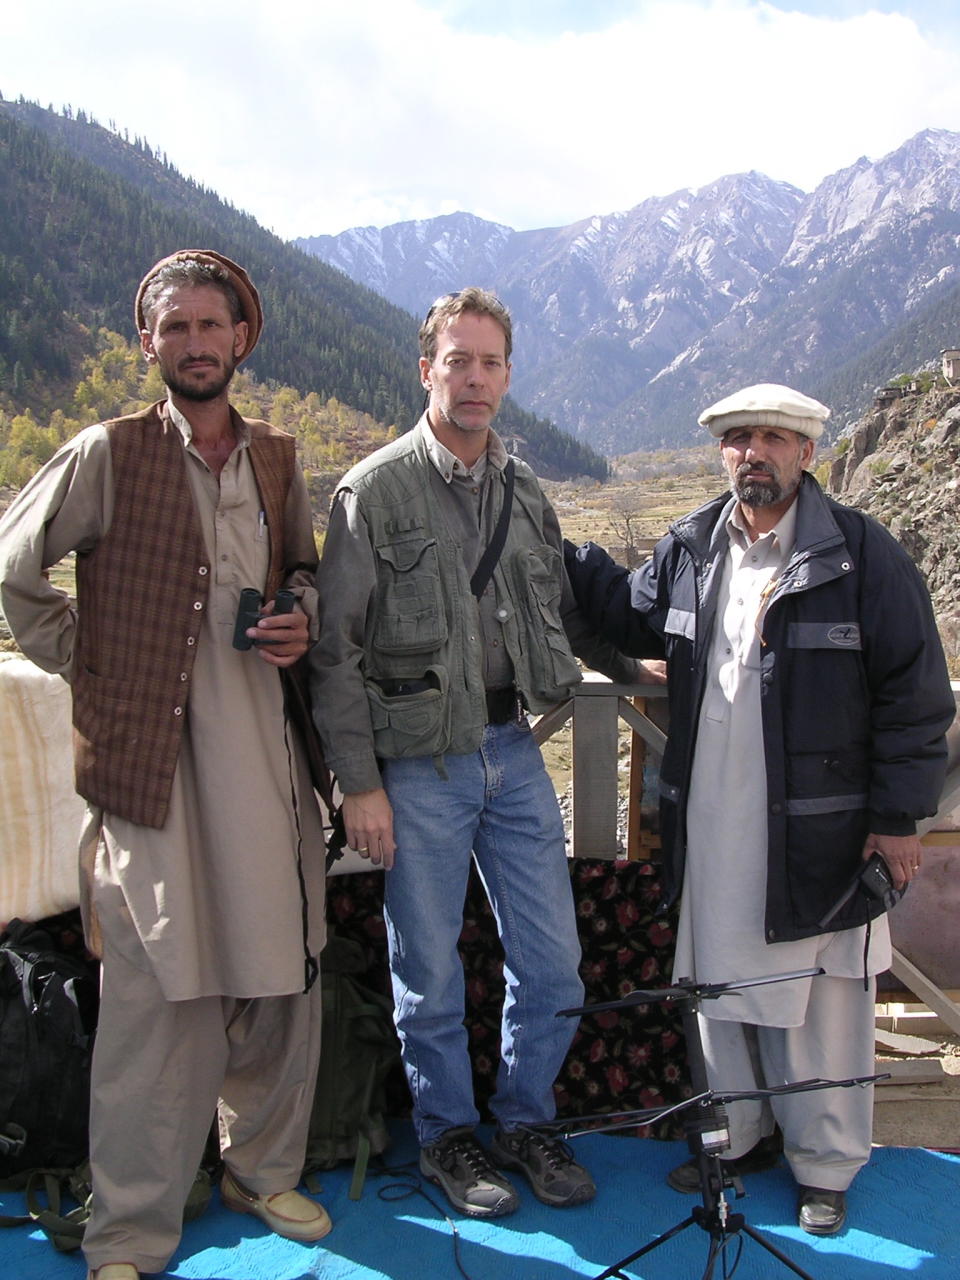 Leahman poses with his provincial chief and deputy chief while stationed in Nuristan, Afghanistan, in 2003.